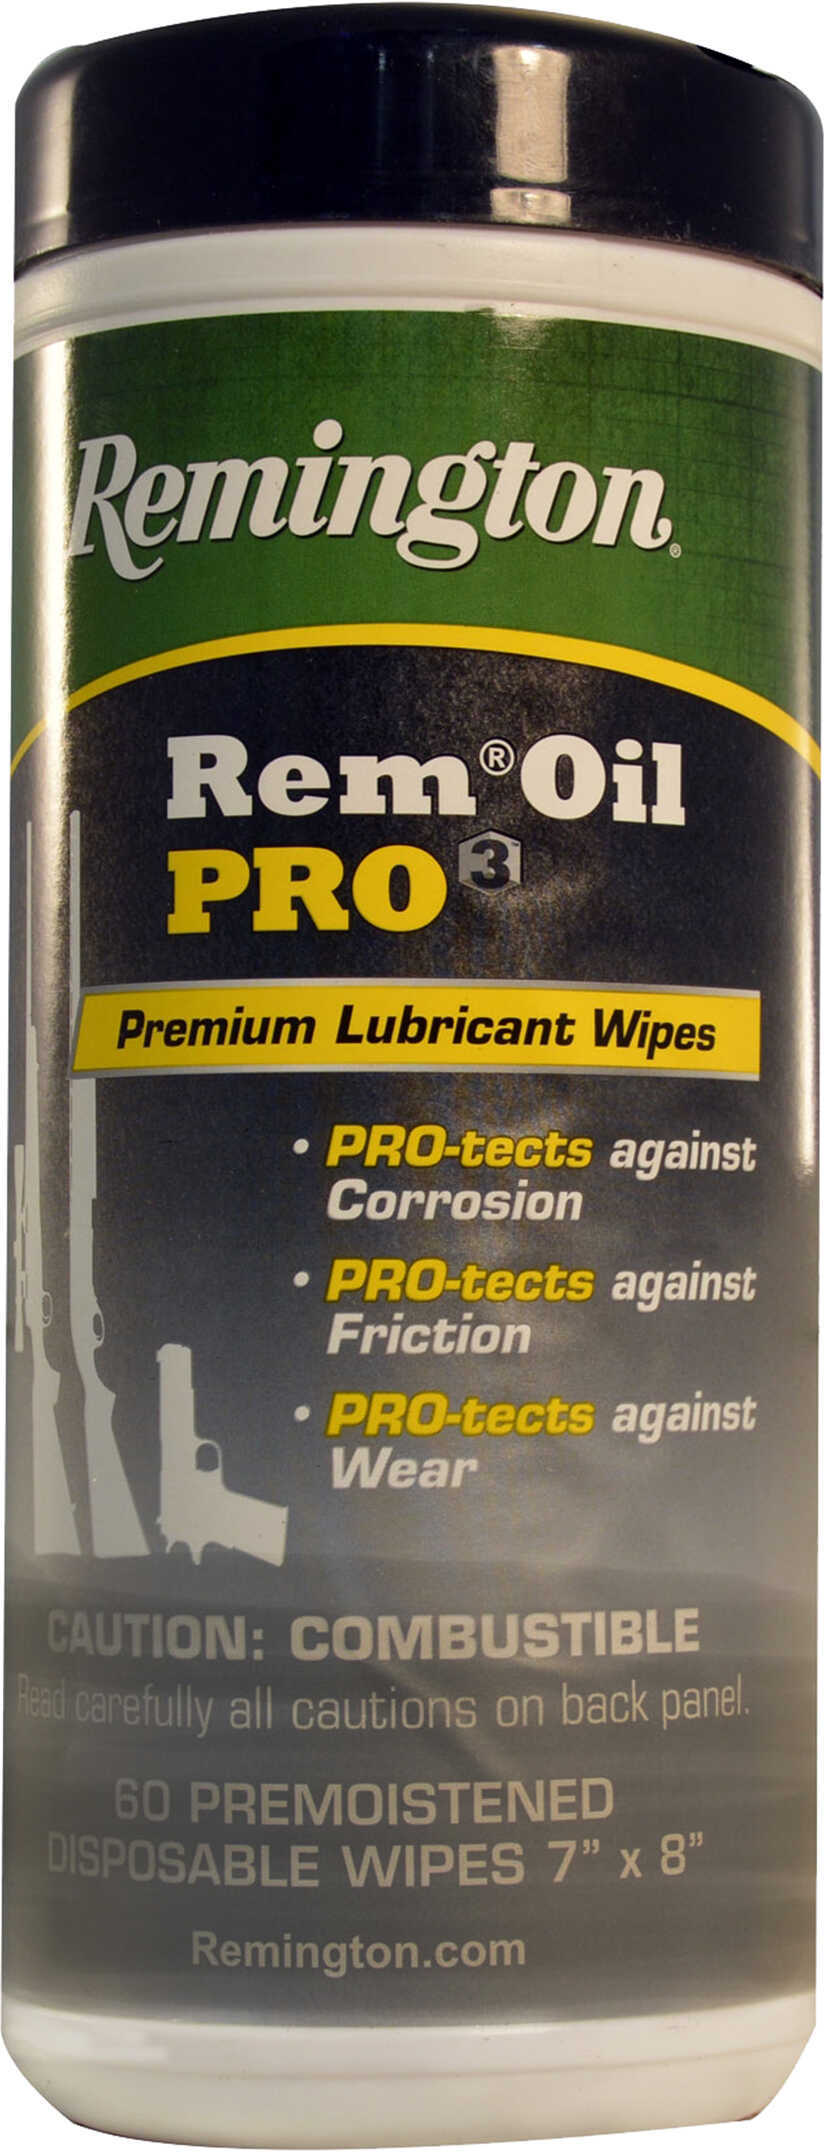 Remington Accessories 18922 Oil Pro3 Lubricant Wipes 60 Count